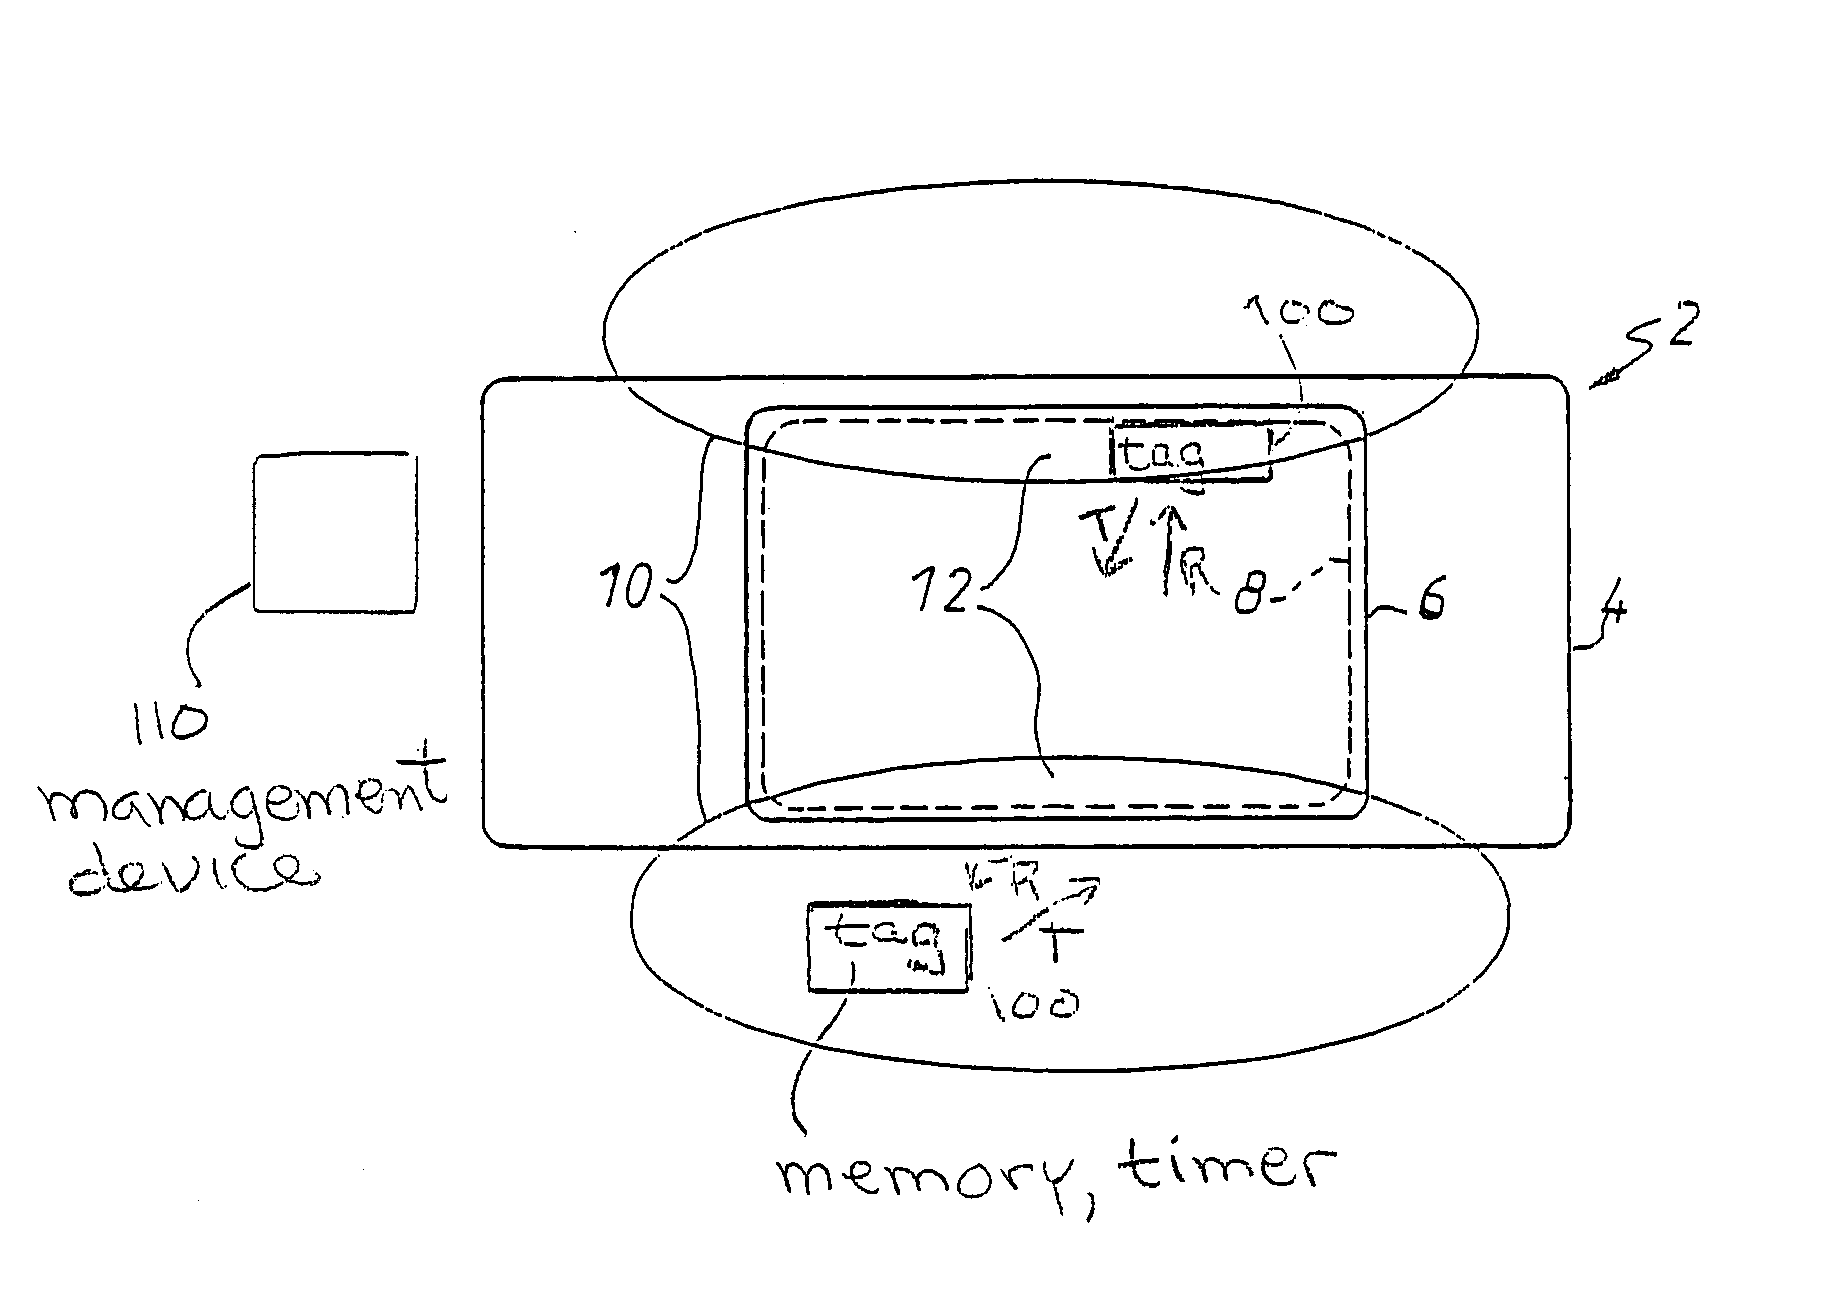 Method for locating a badge for a motor vehicle hands-free system